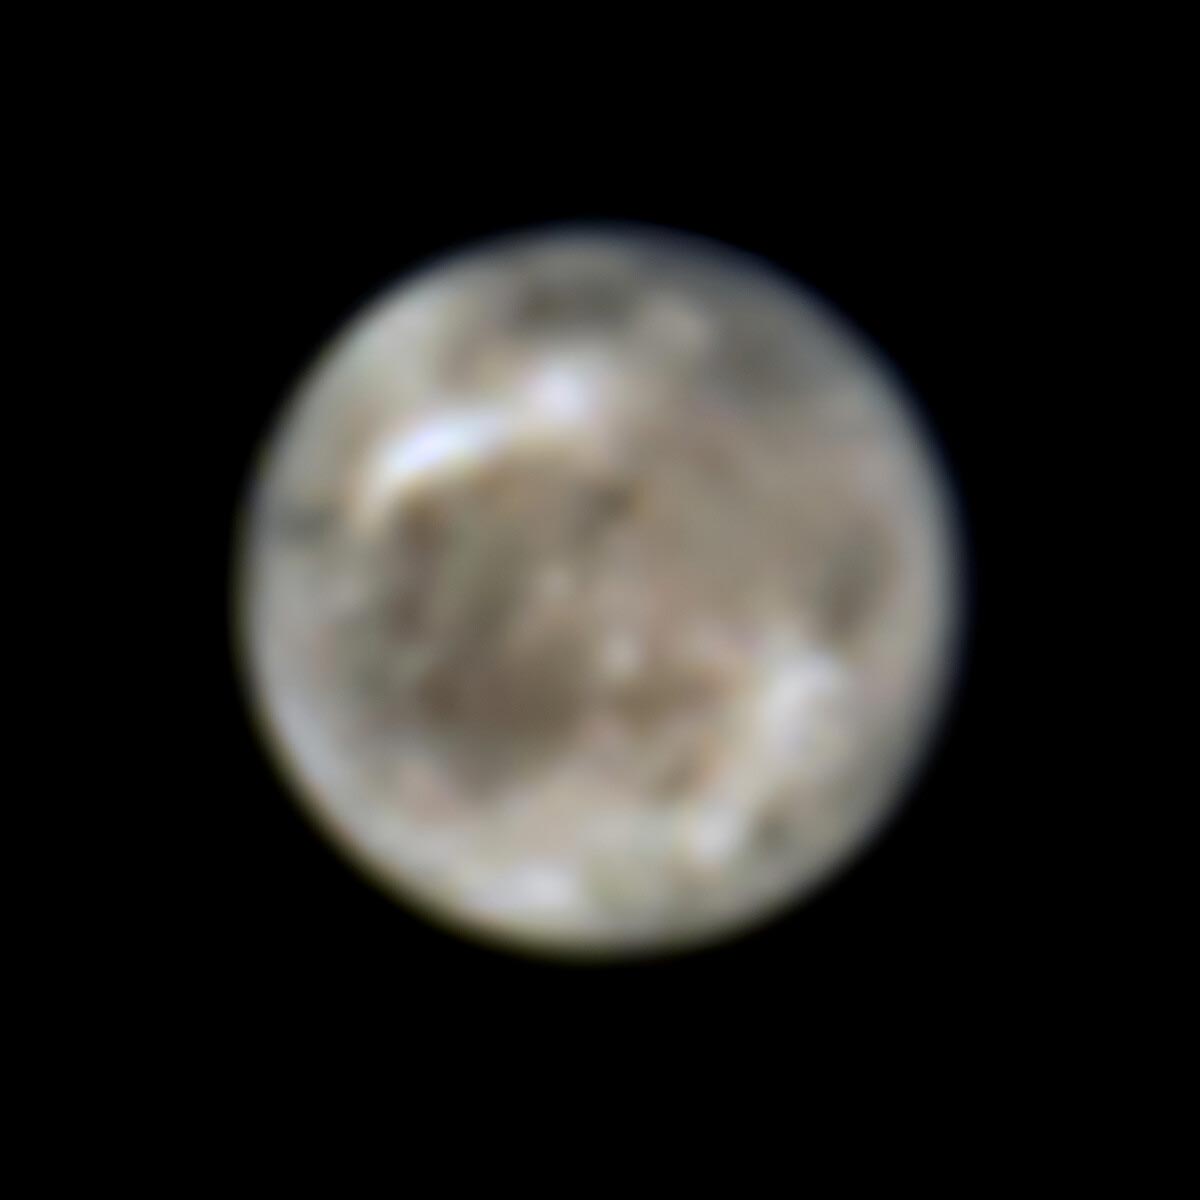 This image shows Jupiter's moon Ganymede as seen by the Hubble Space Telescope in 1996. Ganymede is 800 million km away, and Hubble can track changes on the moon and detect other features at UV and near-infrared wavelengths. Astronomers have now used new data from the Hubble archive to discover for the first time evidence of water vapor in the atmosphere of Jupiter's moon Ganymede. found due to thermal escape of water vapor from ice on the lunar surface Credit: NASA, ESA, John Spencer (SwRI Boulder)